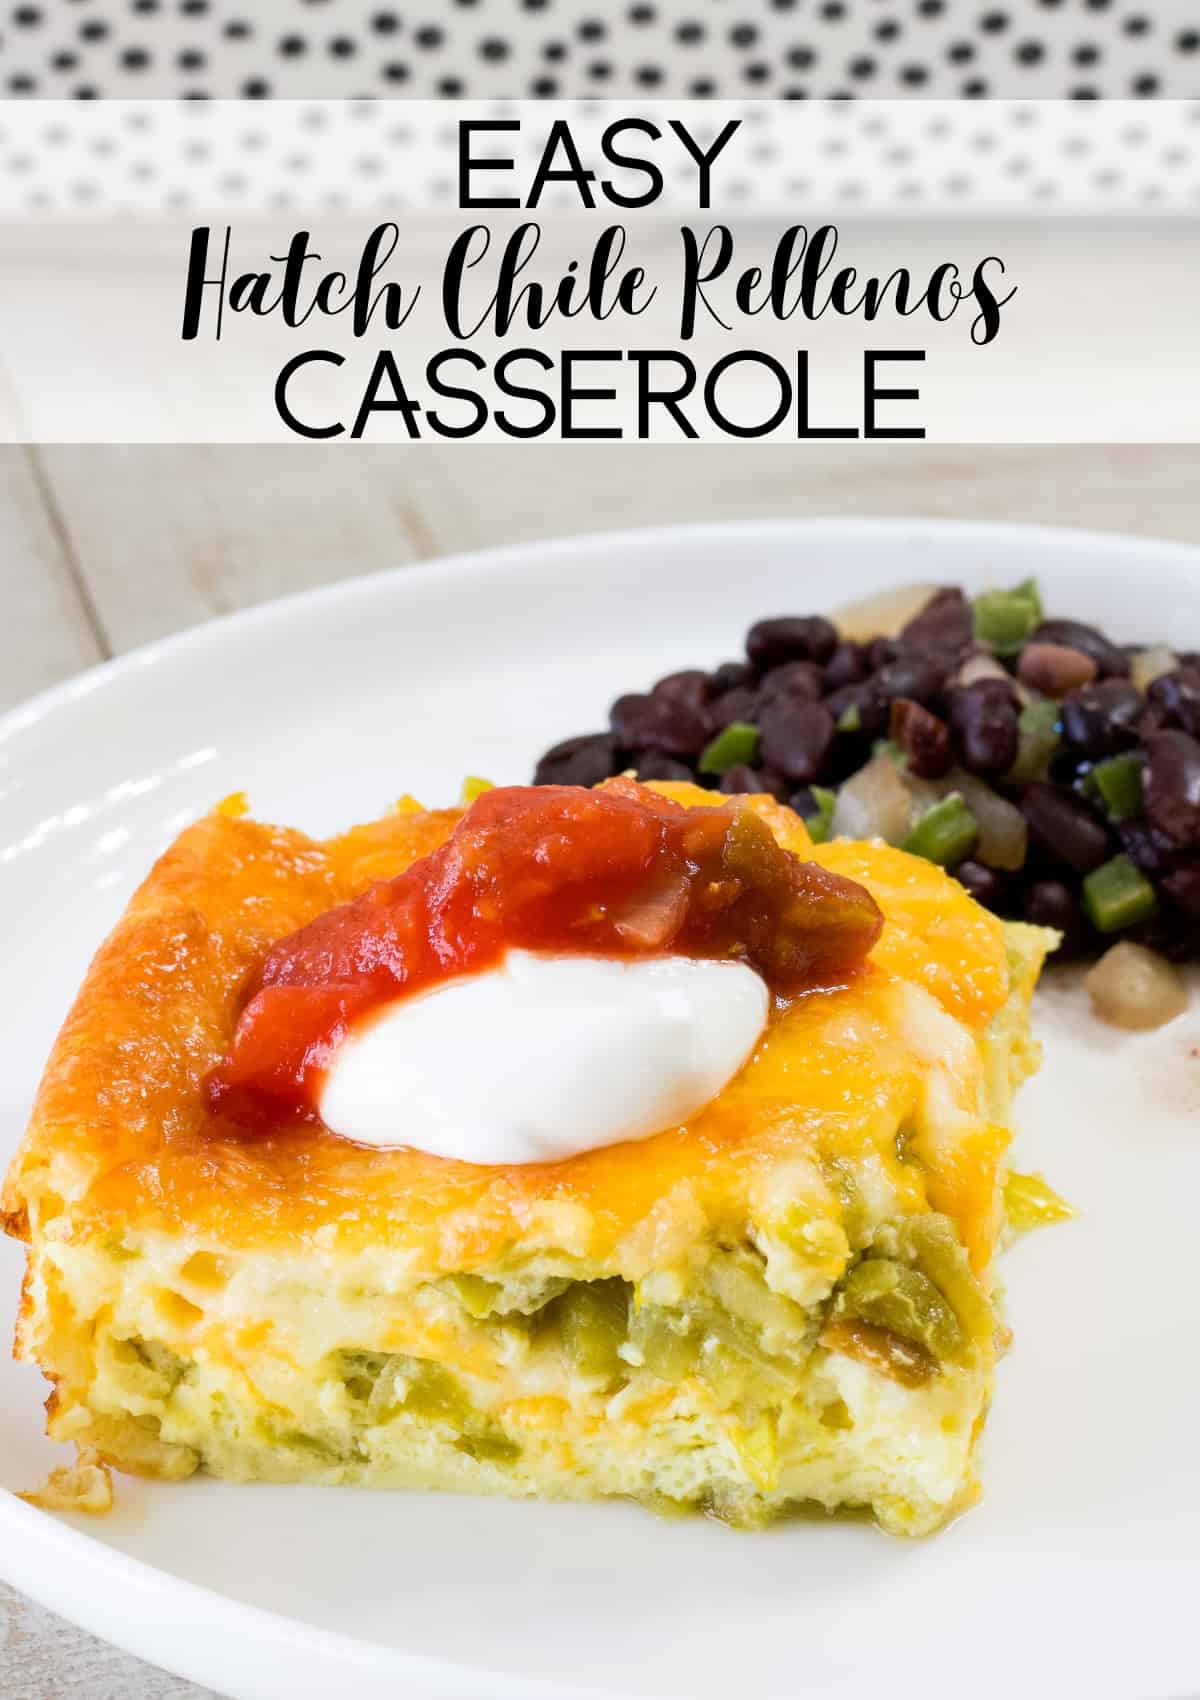 One piece of easy hatch chile rellenos casserole topped with sour cream and salsa. The recipe title is at the top of the image.